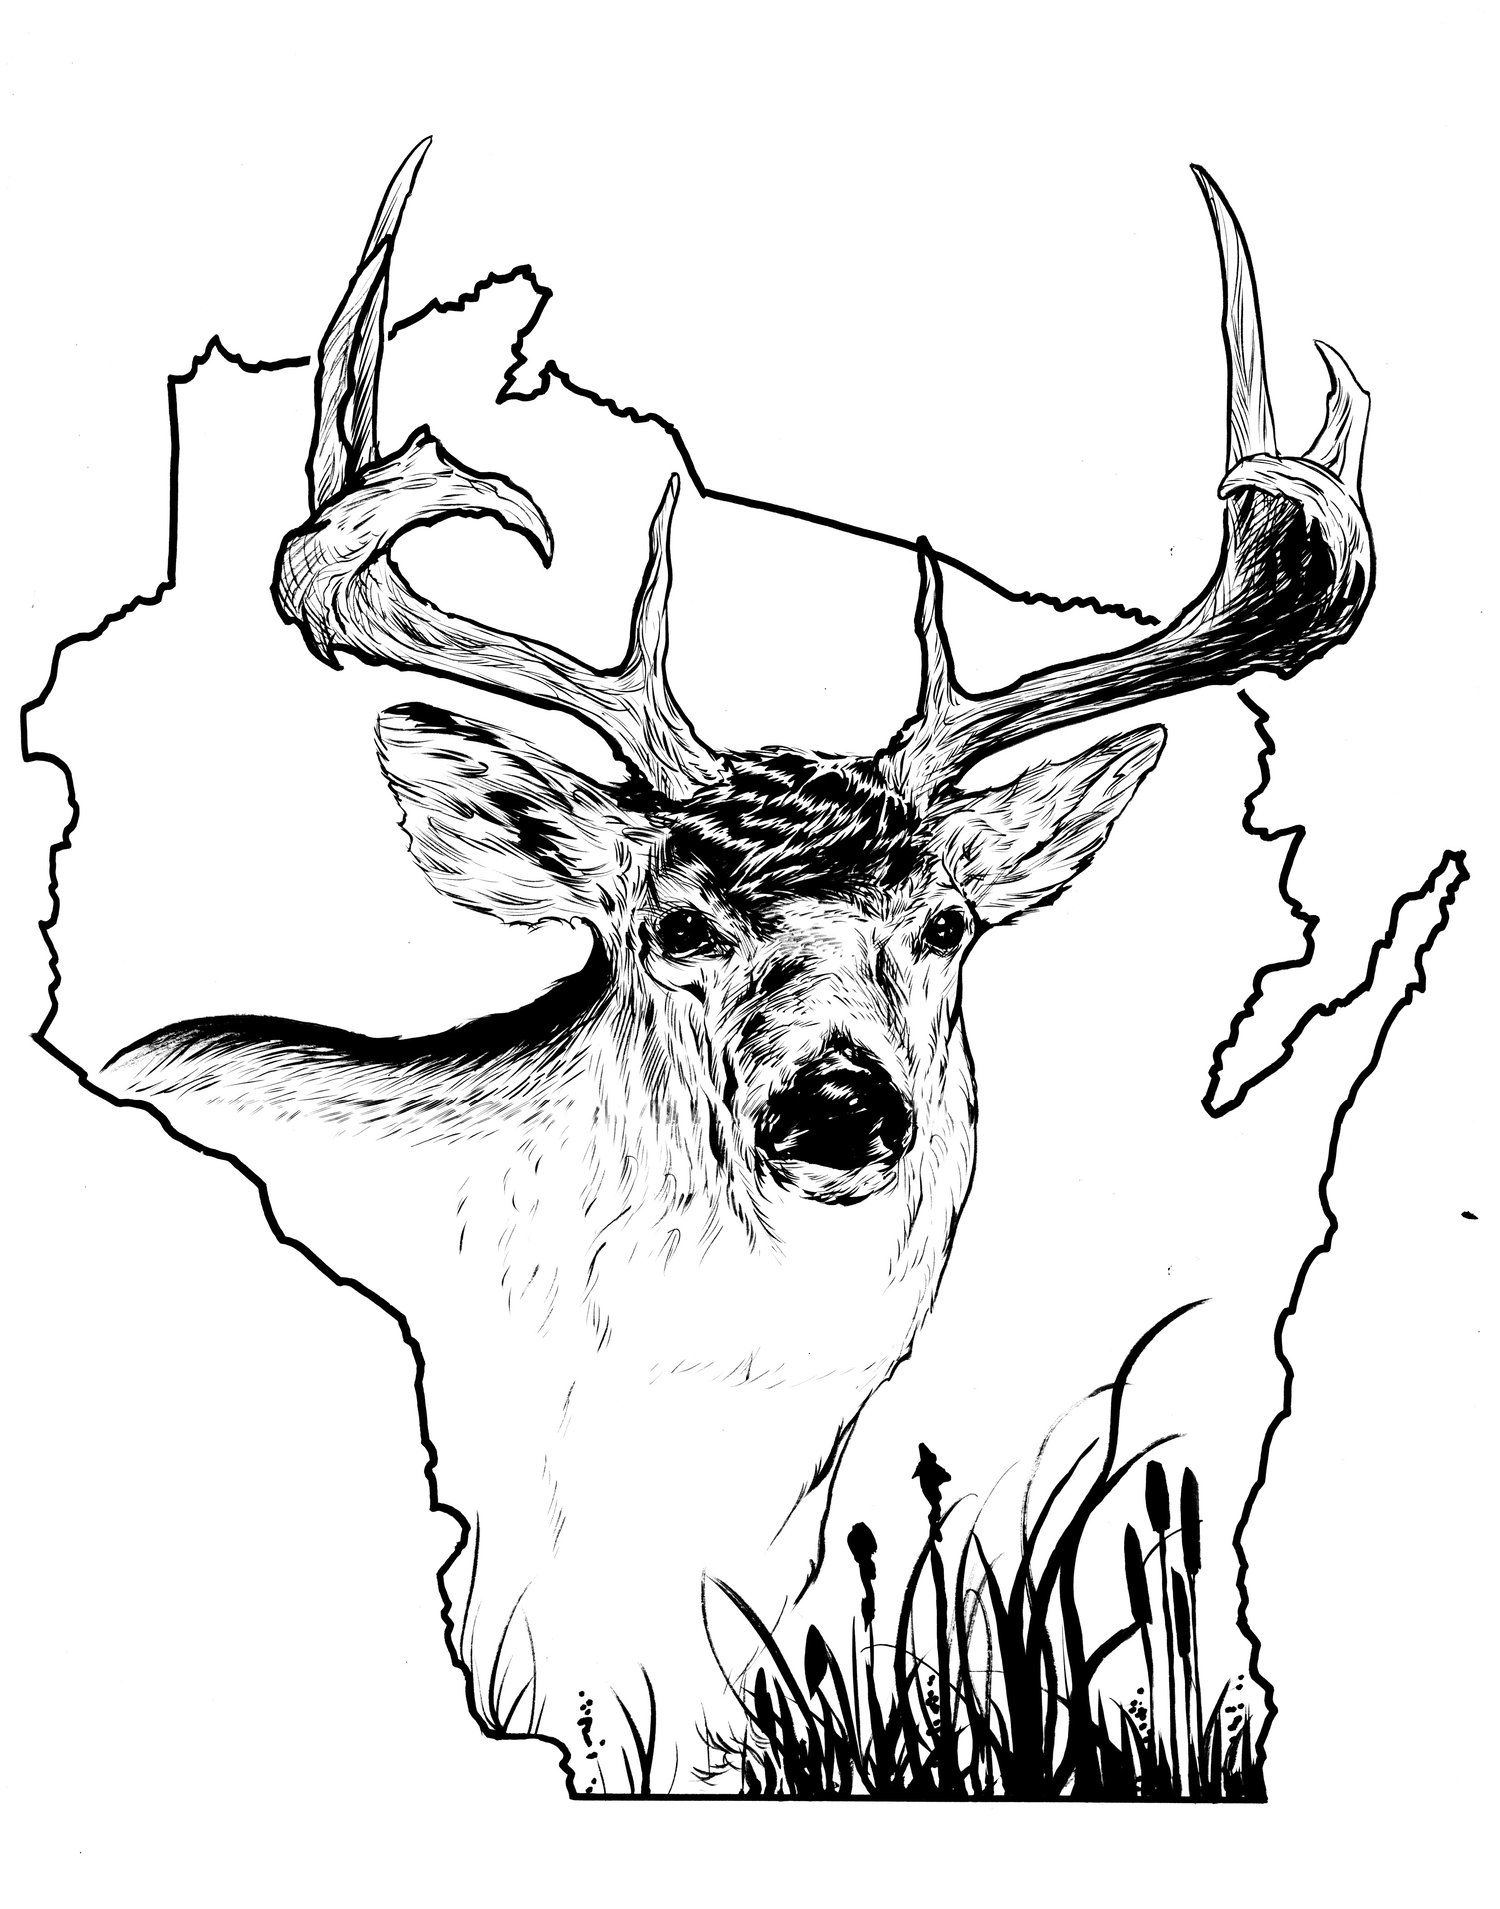 Image of wisconsin whitetail inked piece